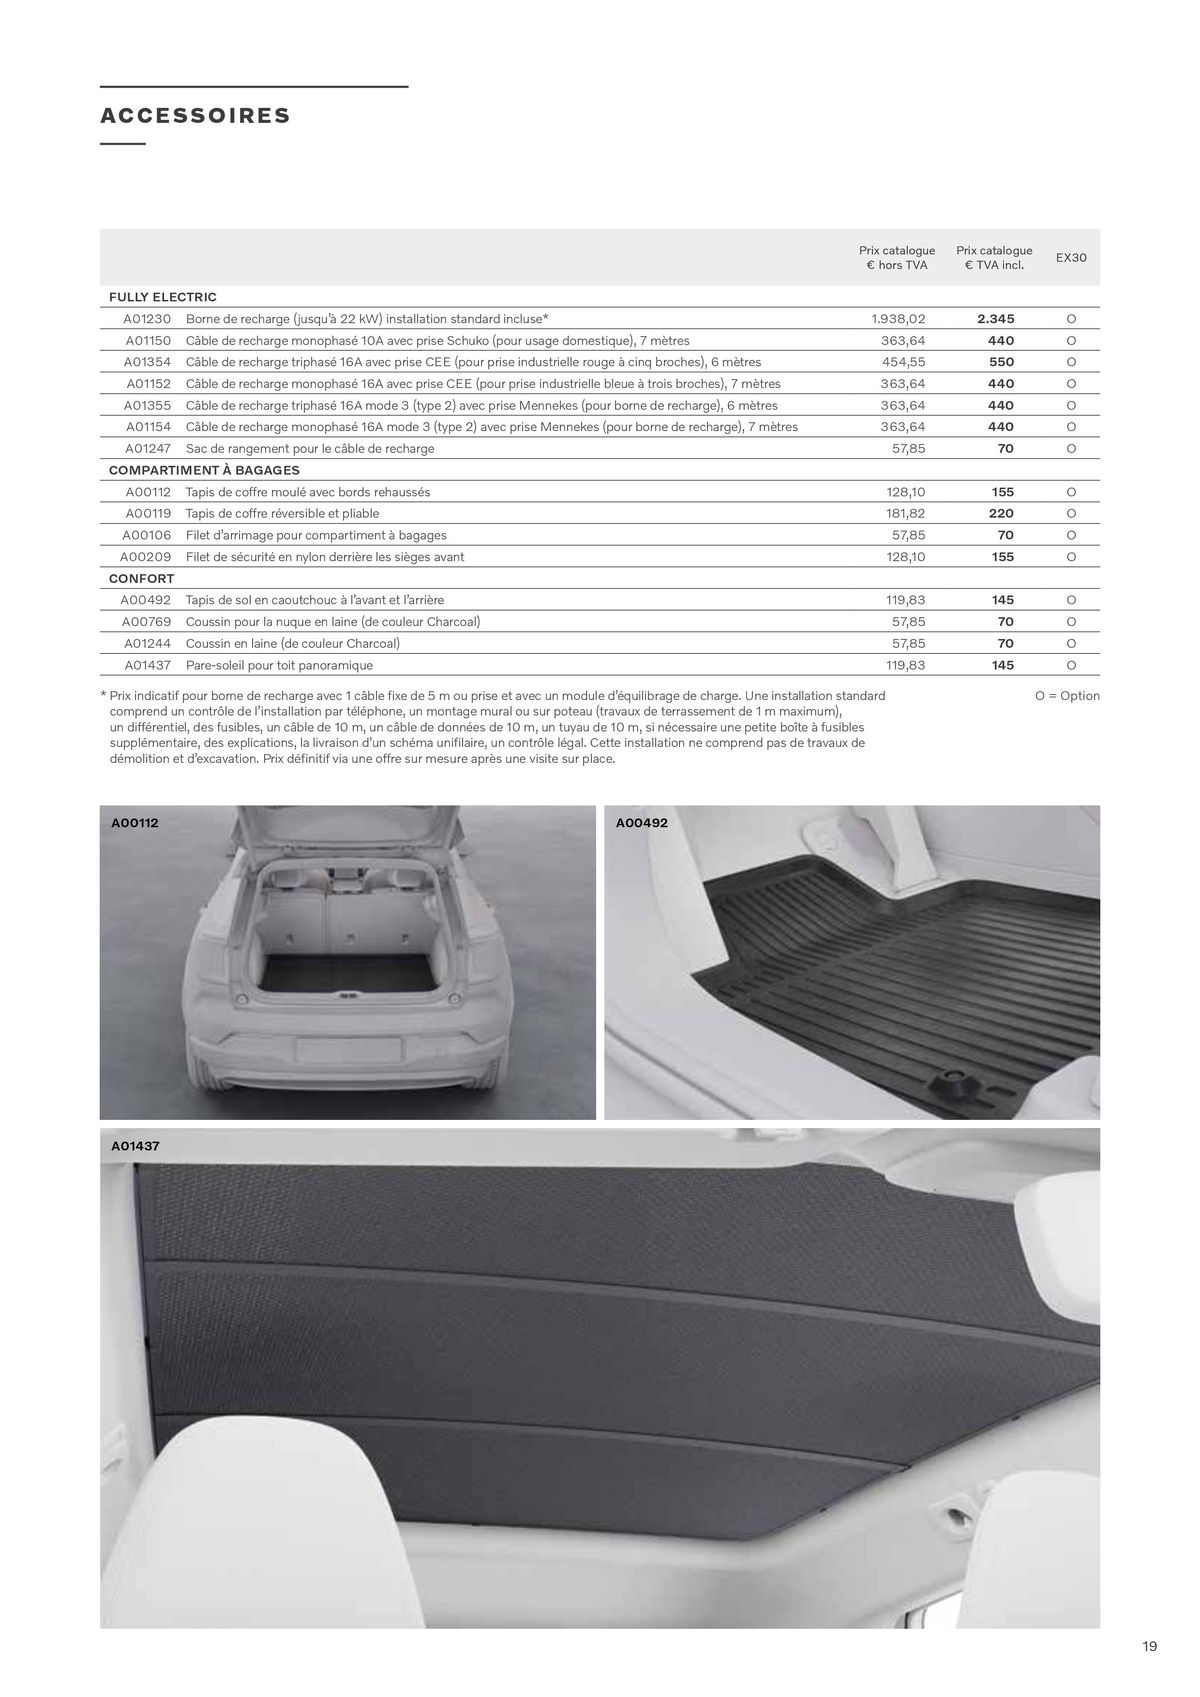 Catalogue VOLVO EX30 FULLY ELECTRIC, page 00019